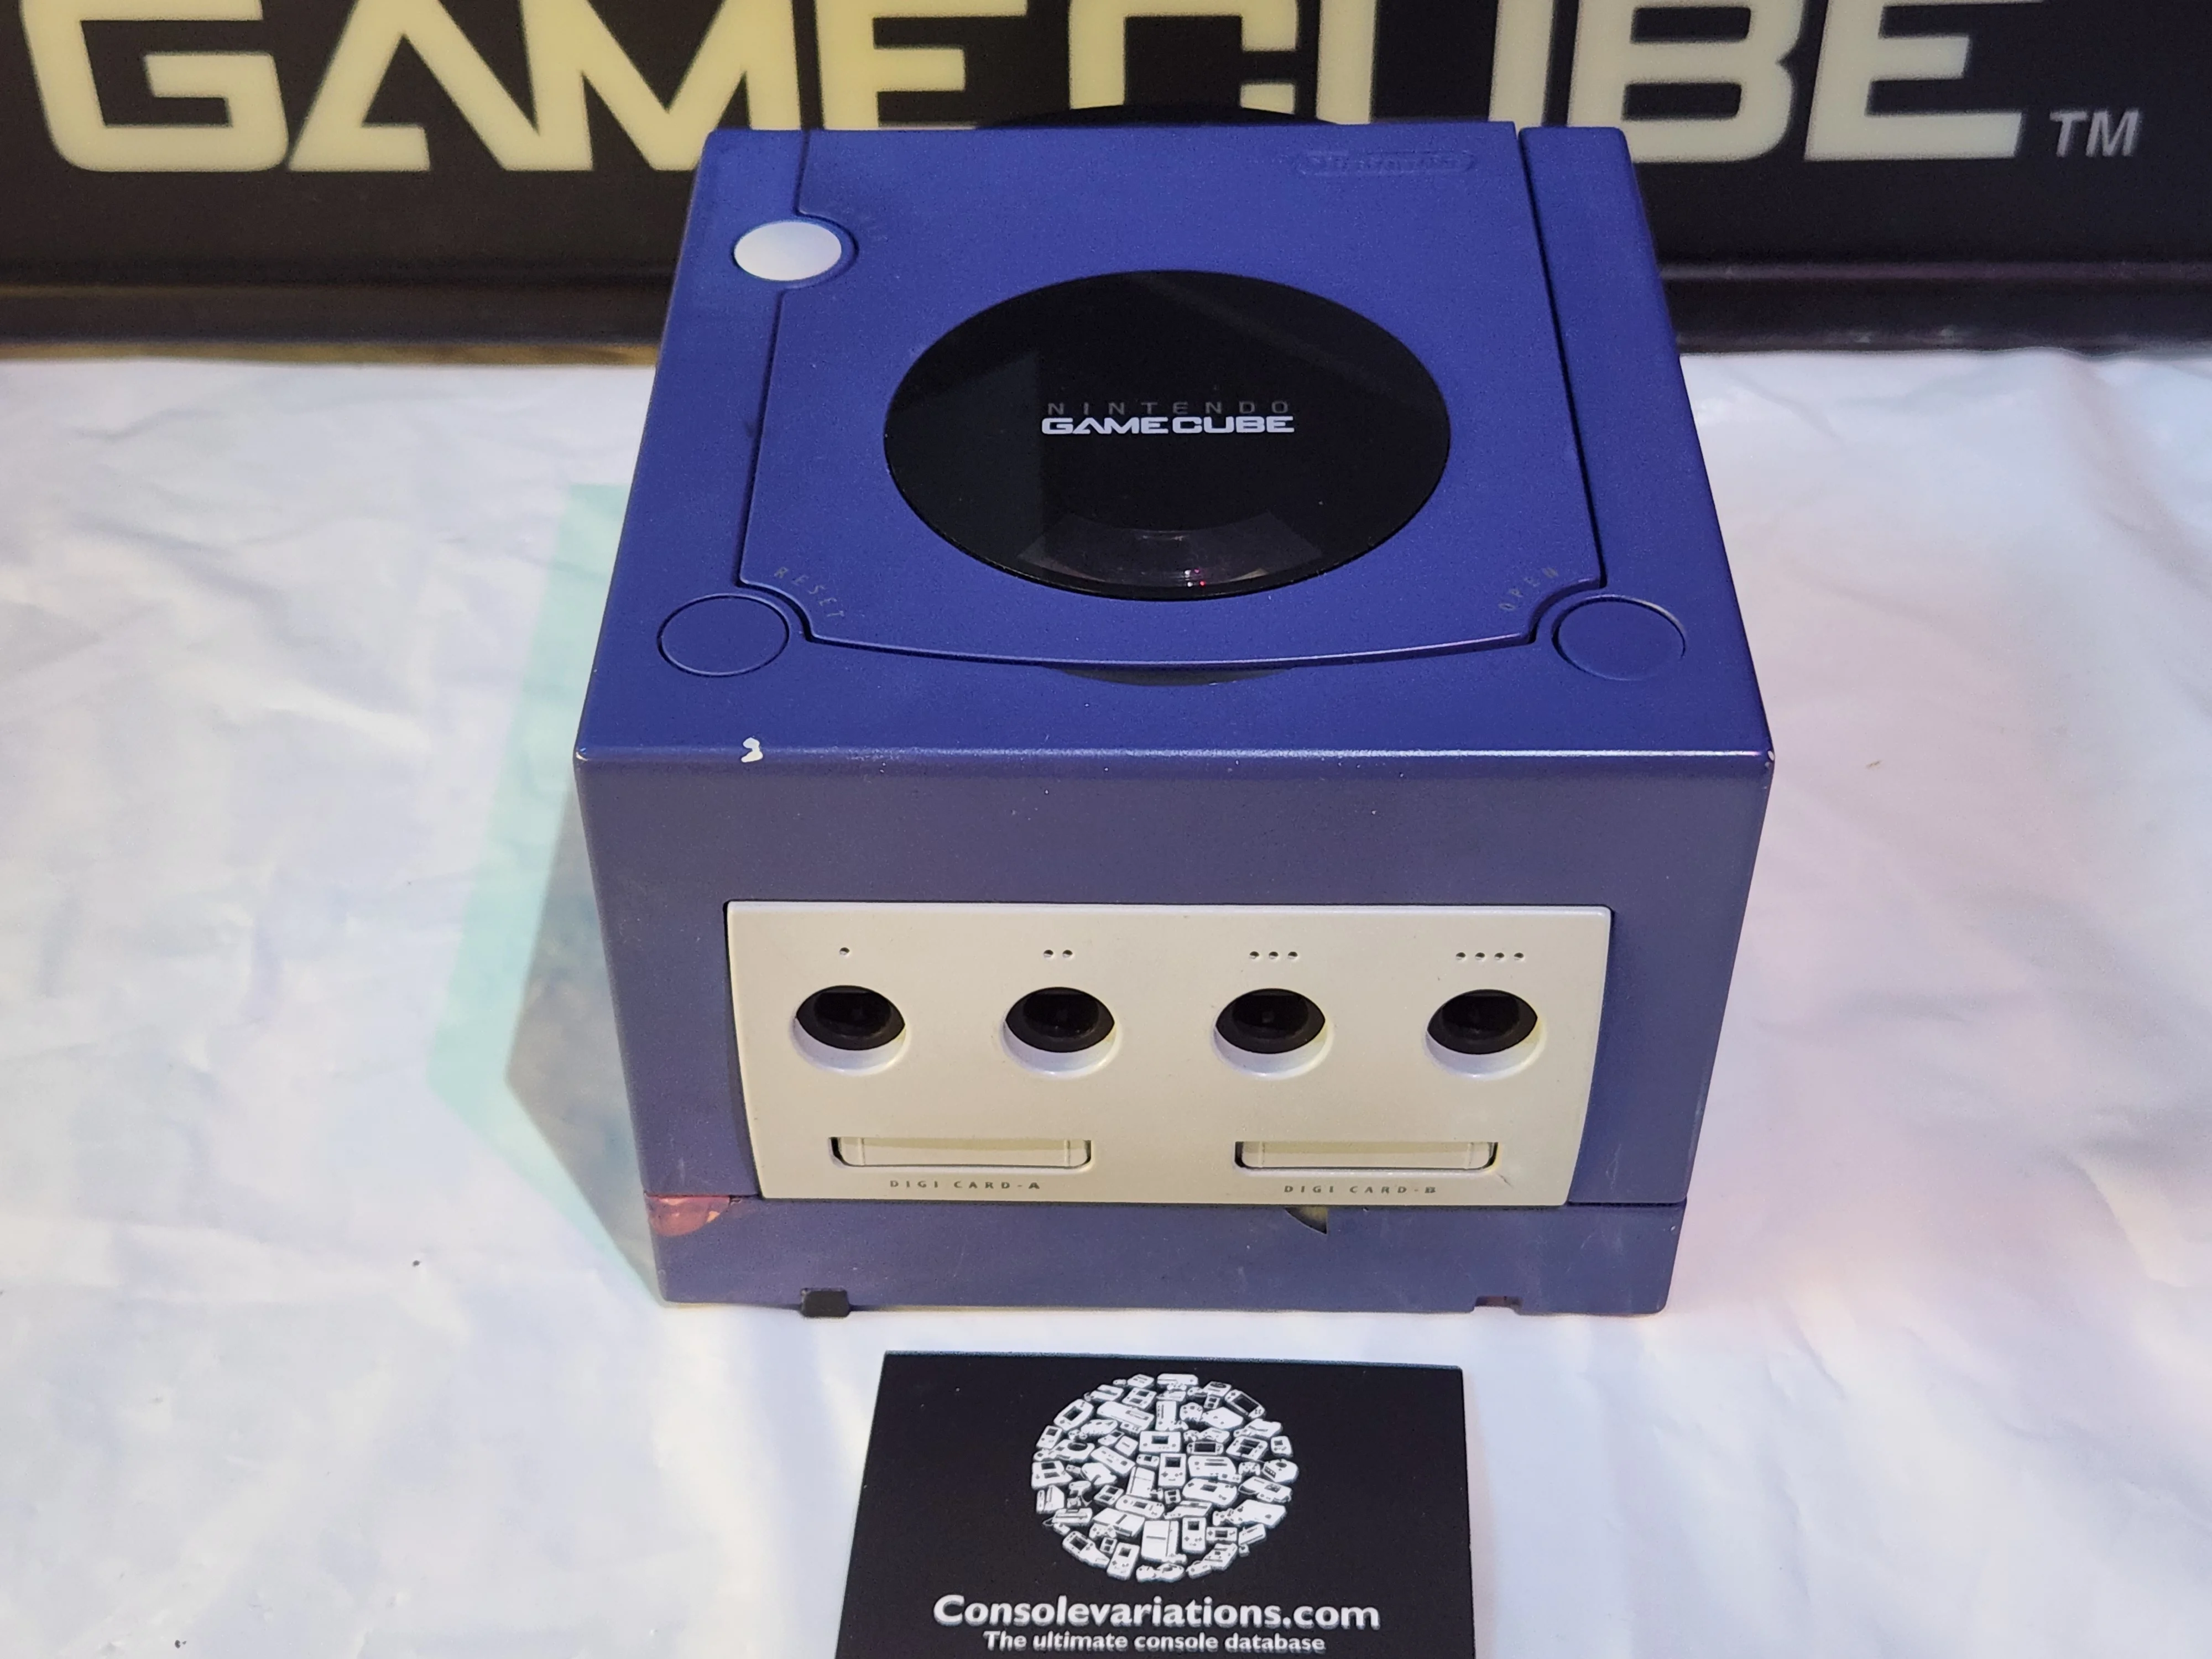 Spaceworld GameCube from above